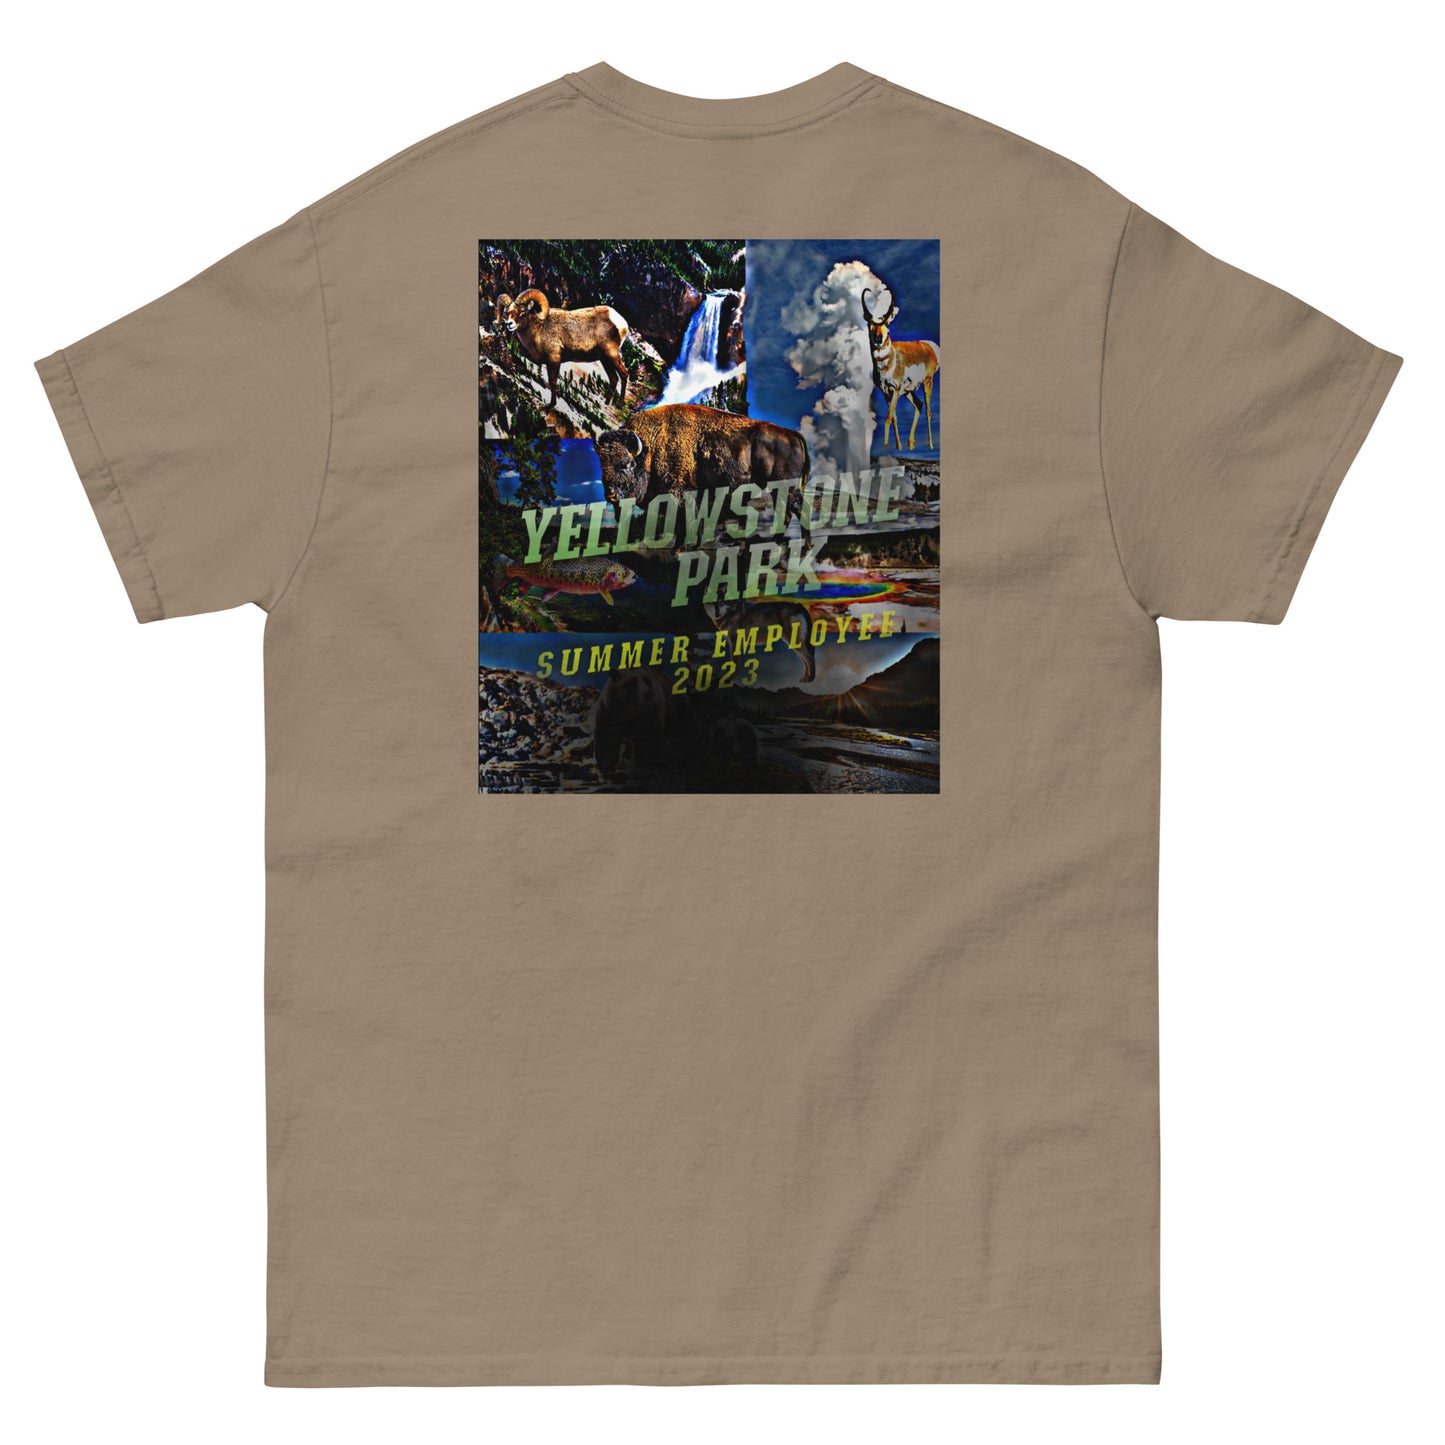 Yellowstone Park Summer Employee classic tee - Collage